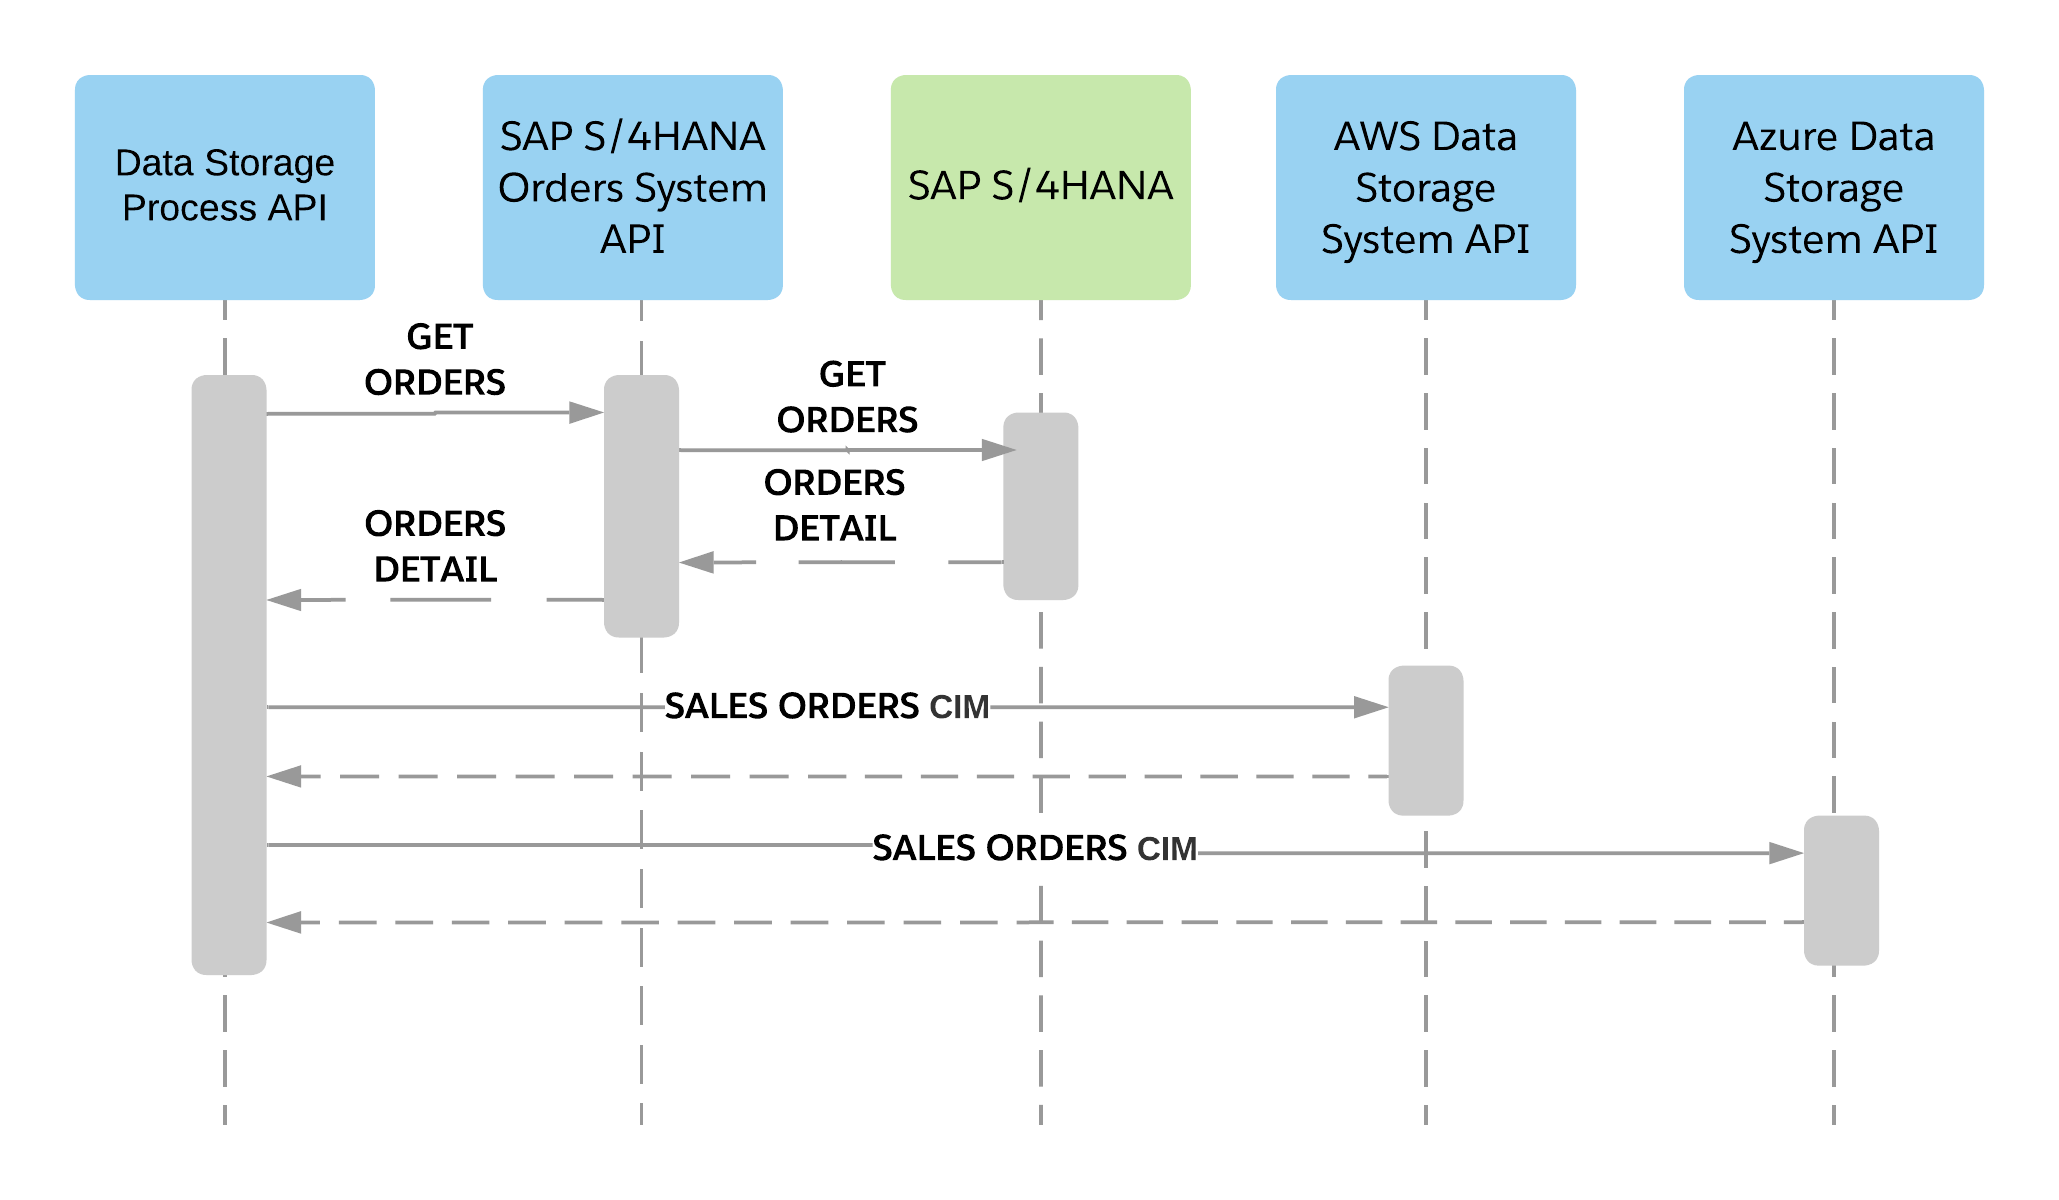 sap-datalakes-batch-sap-orders-sequence-diagram.png